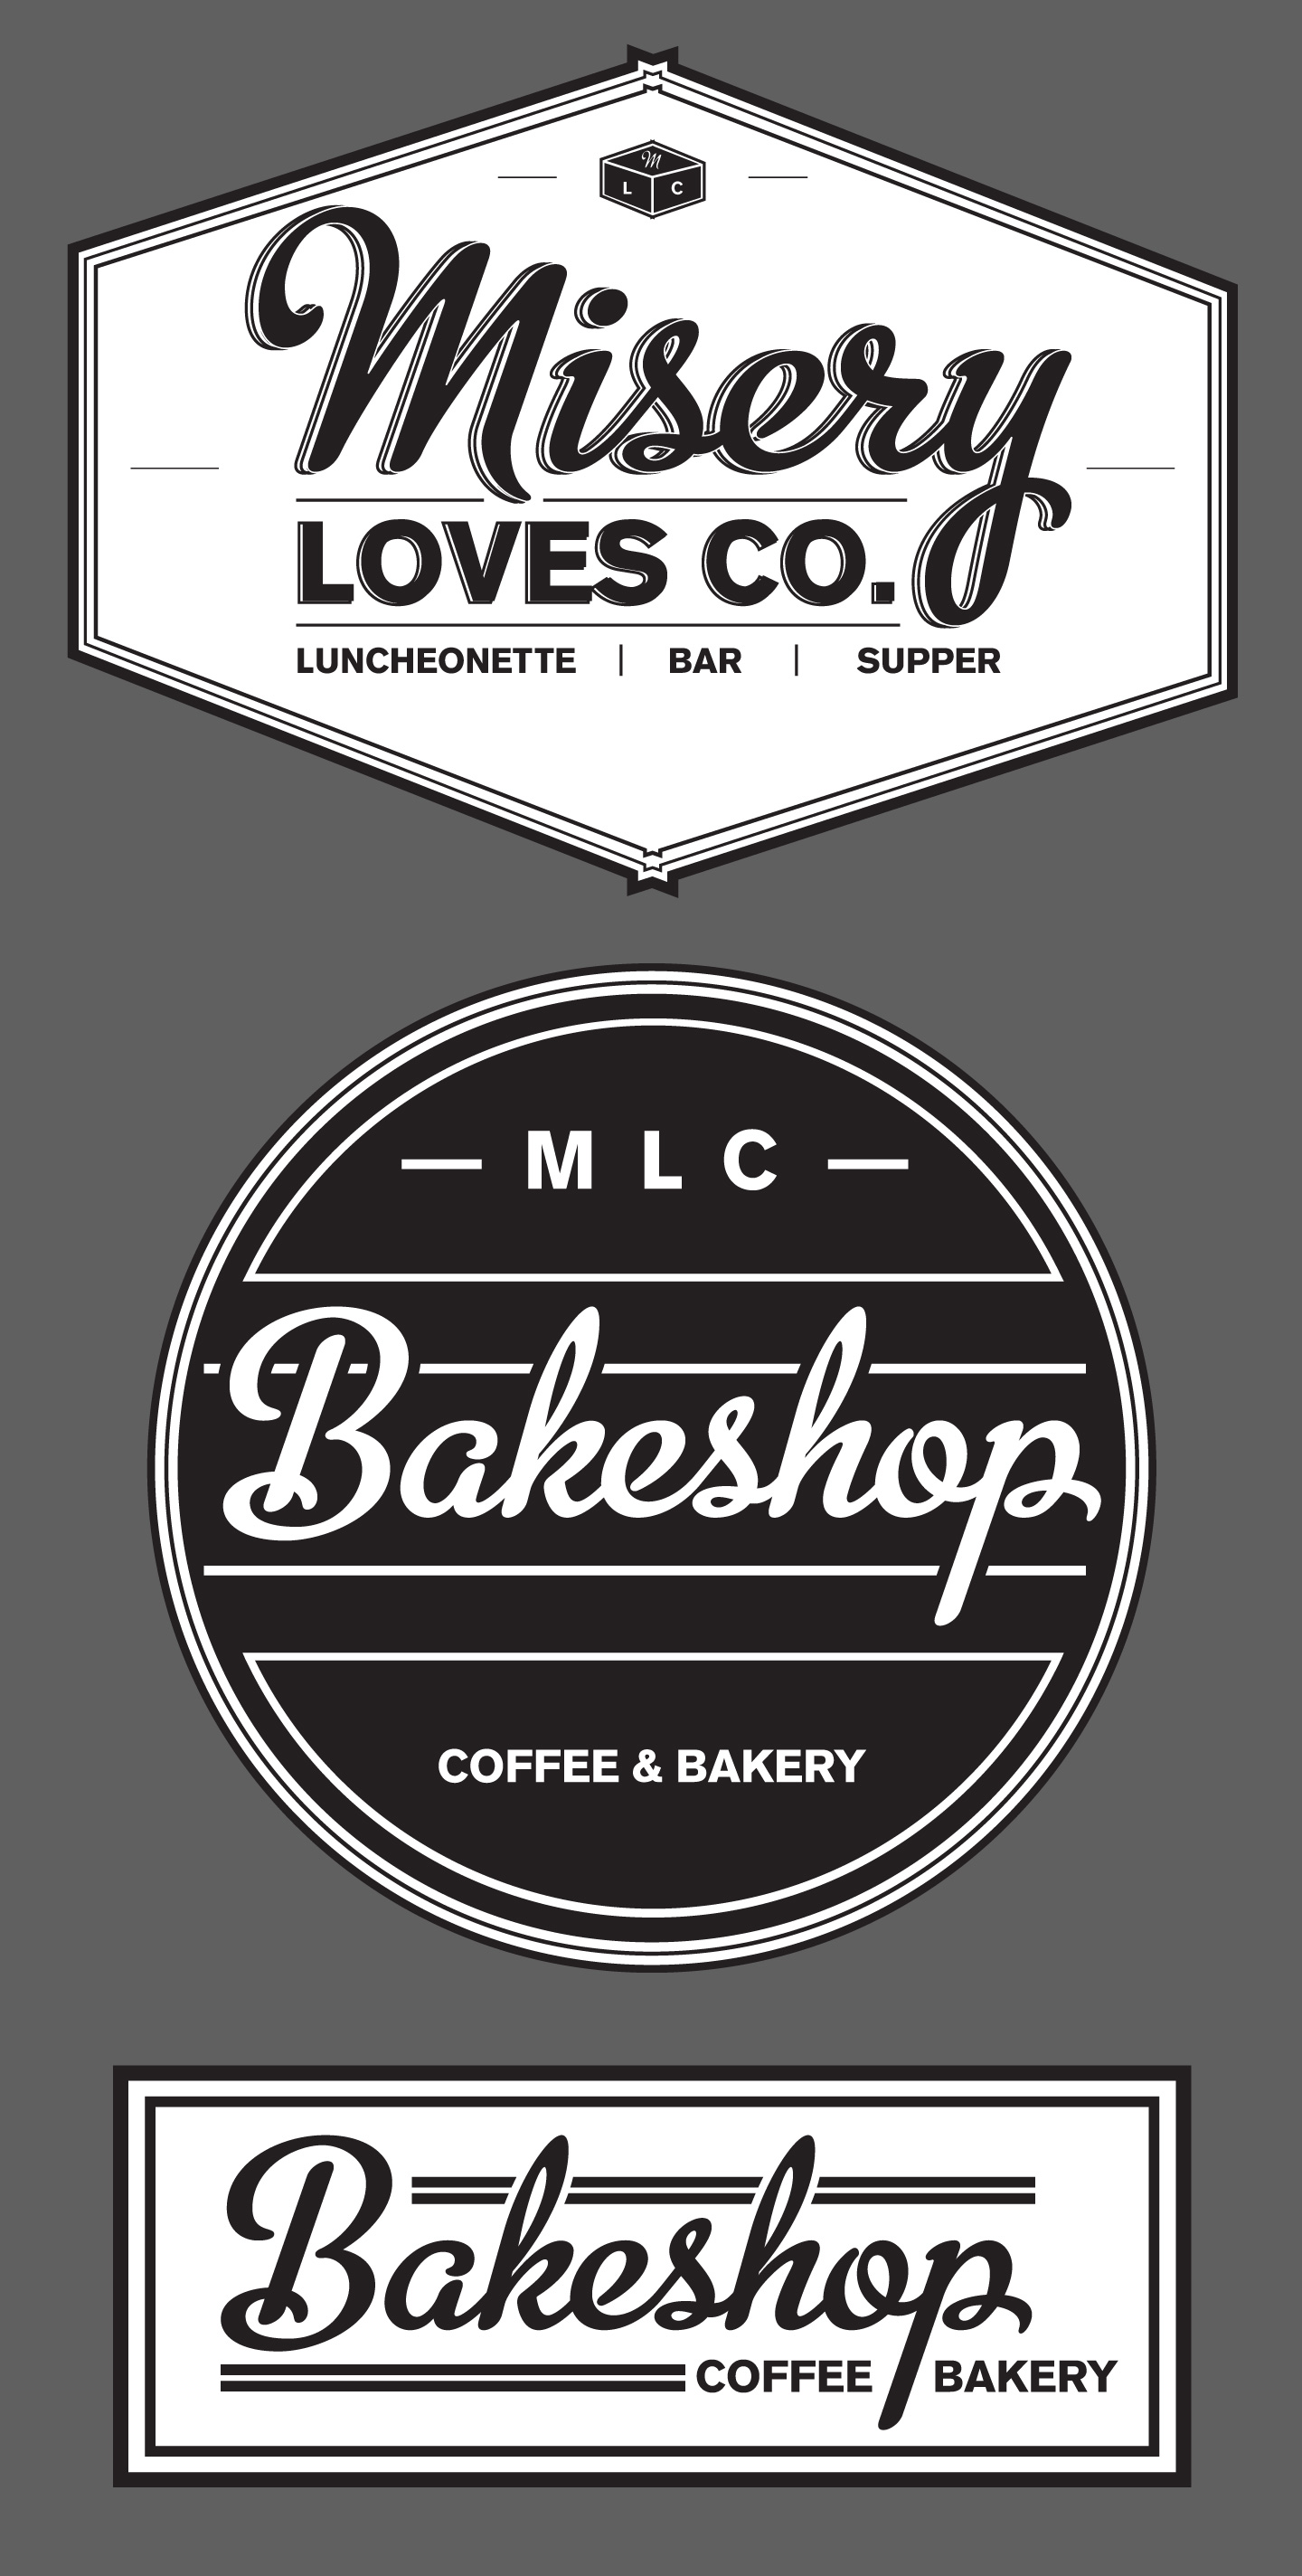 Misery Loves Co. and MLC Bakeshop Signage Designs